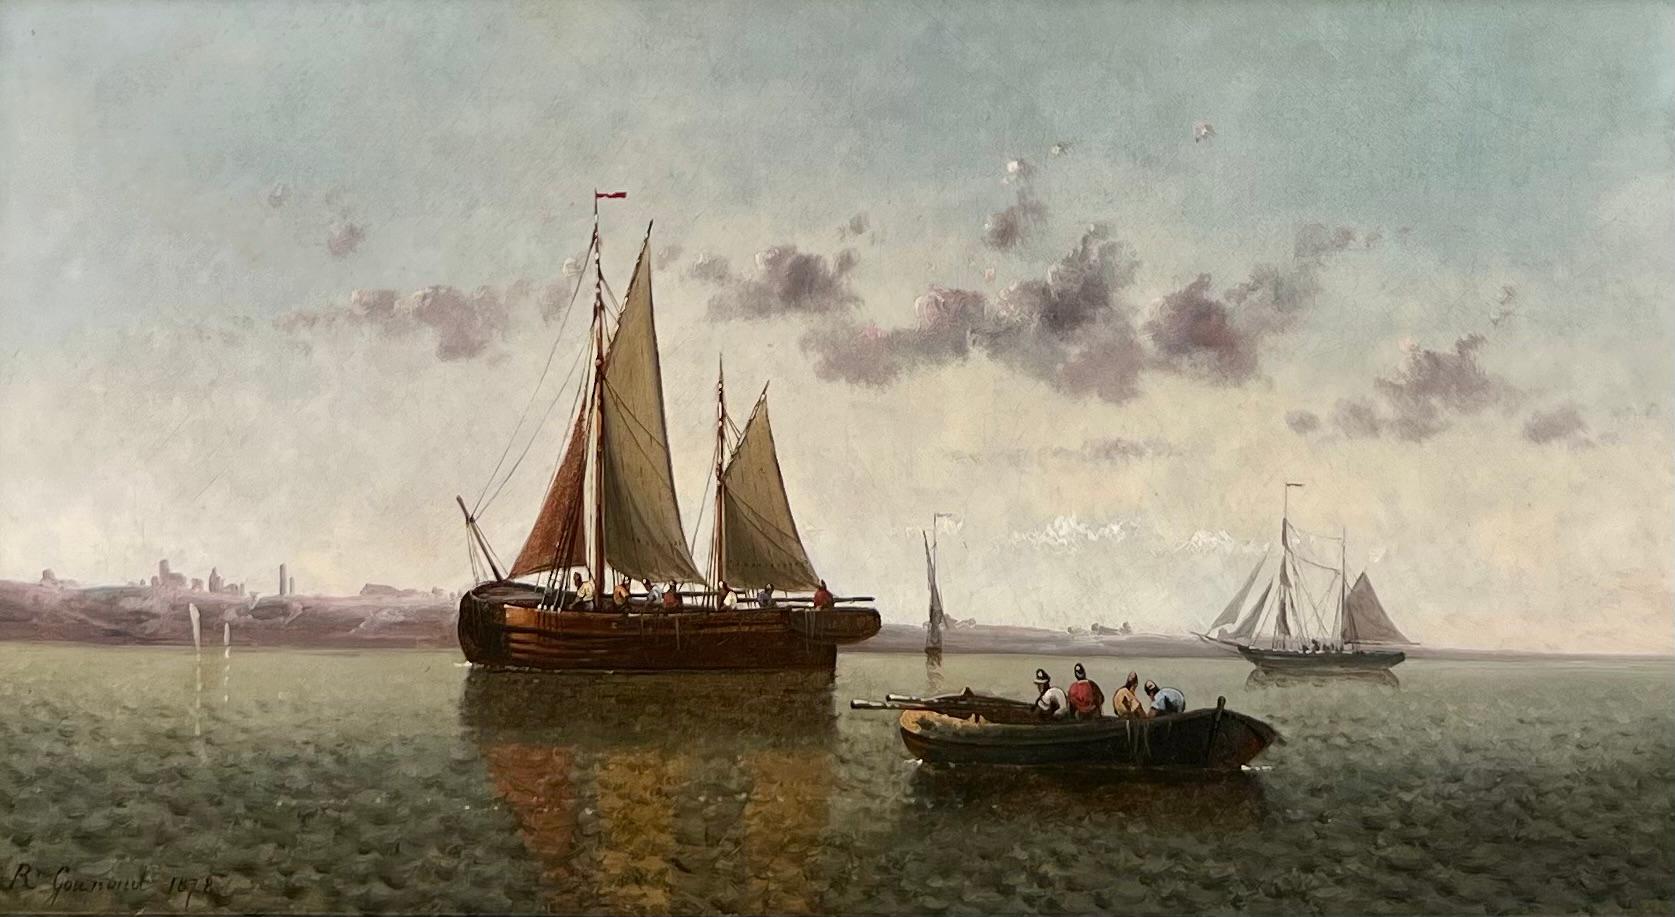 Victorian Painting of a Ships in a Calm Harbor 19th Century